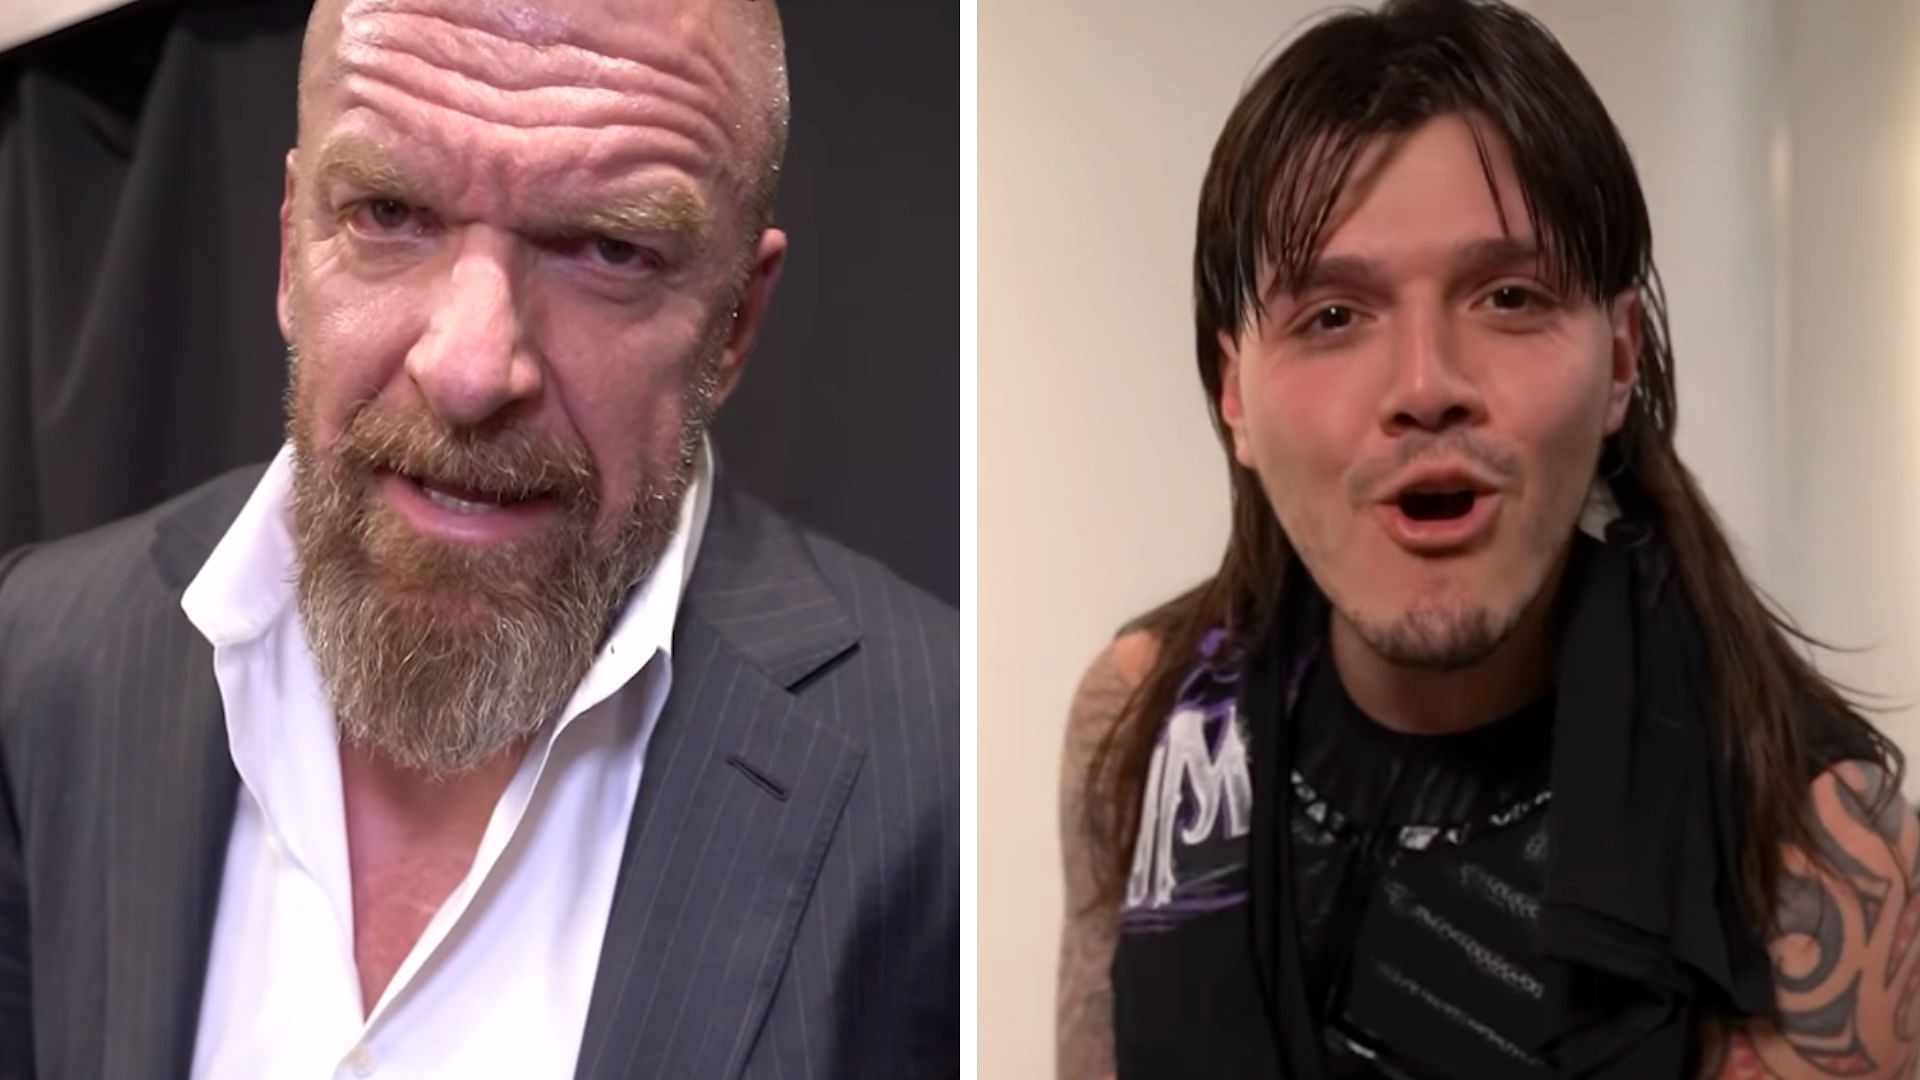 Several stars have sent a message ahead of RAW.